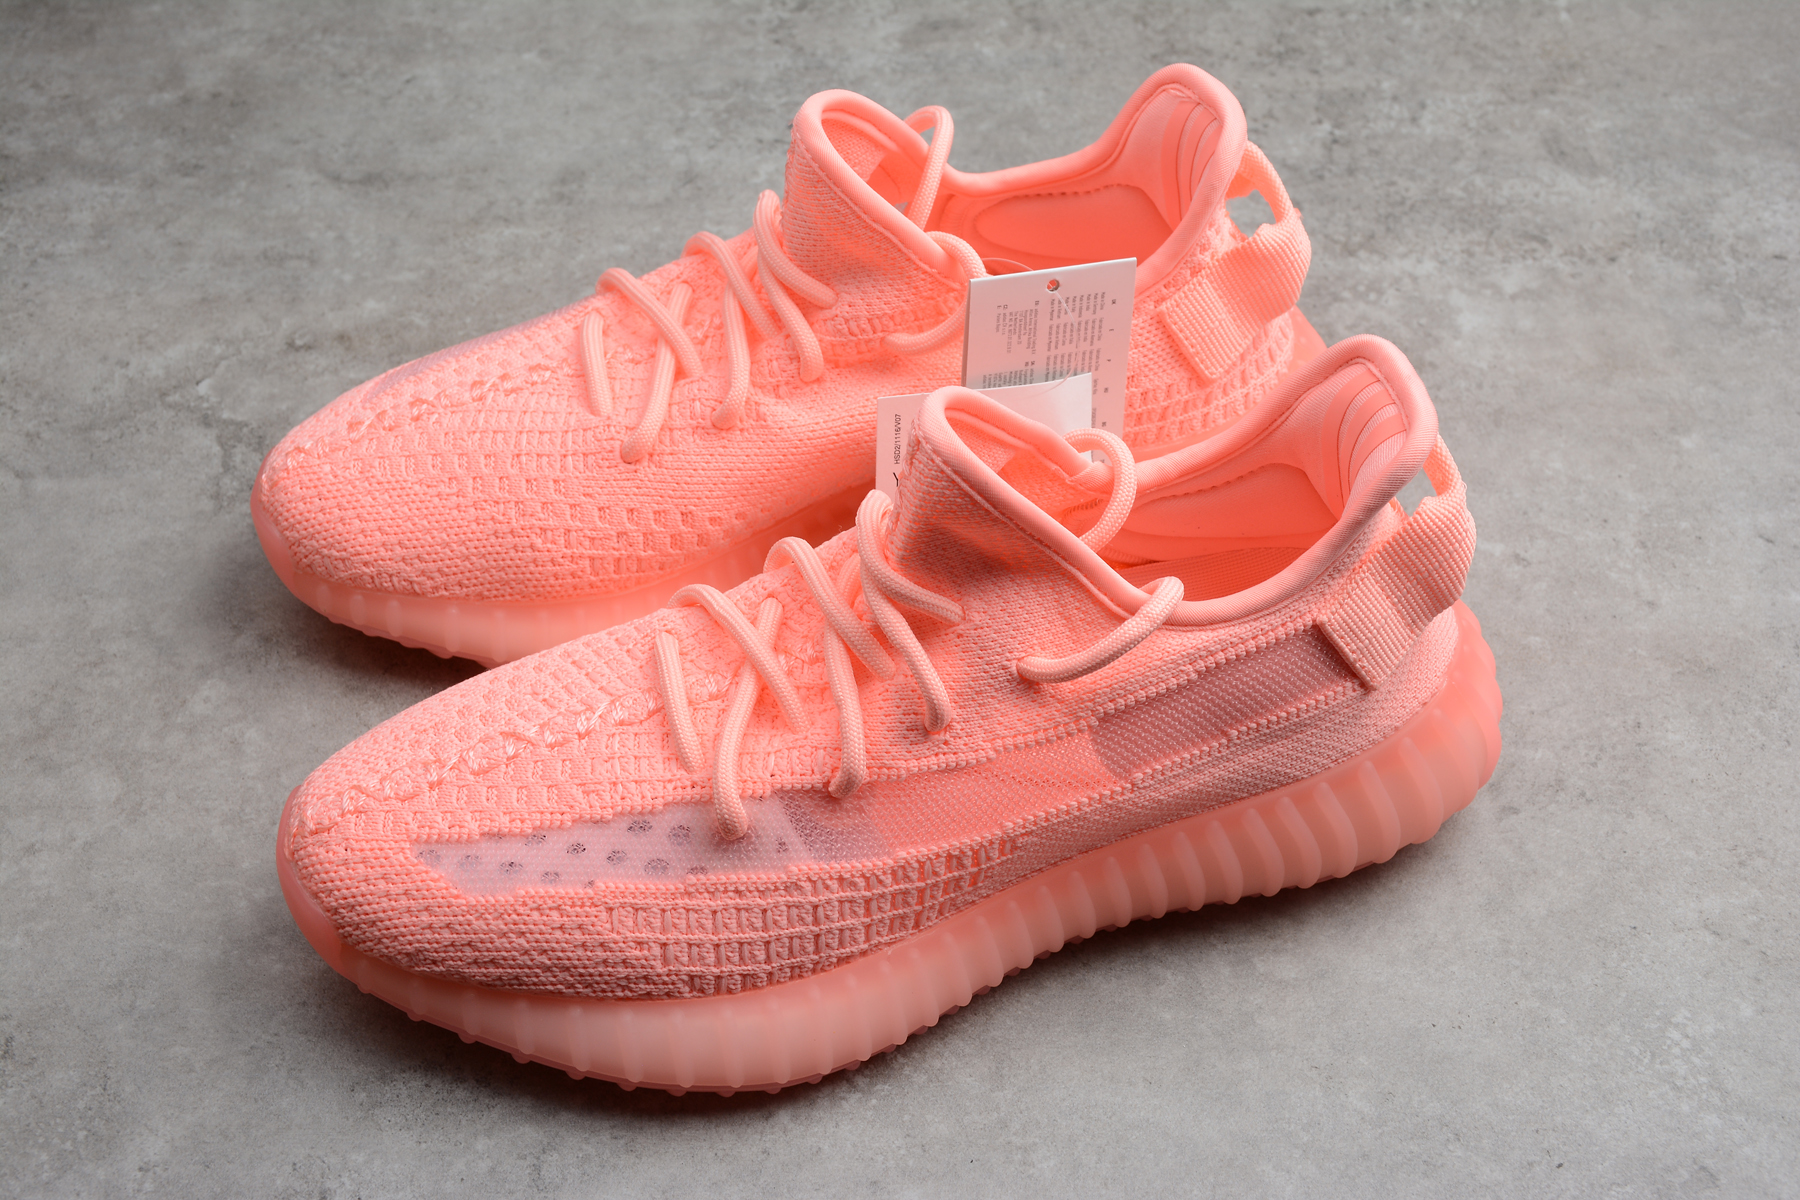 yeezy boost 350 pink